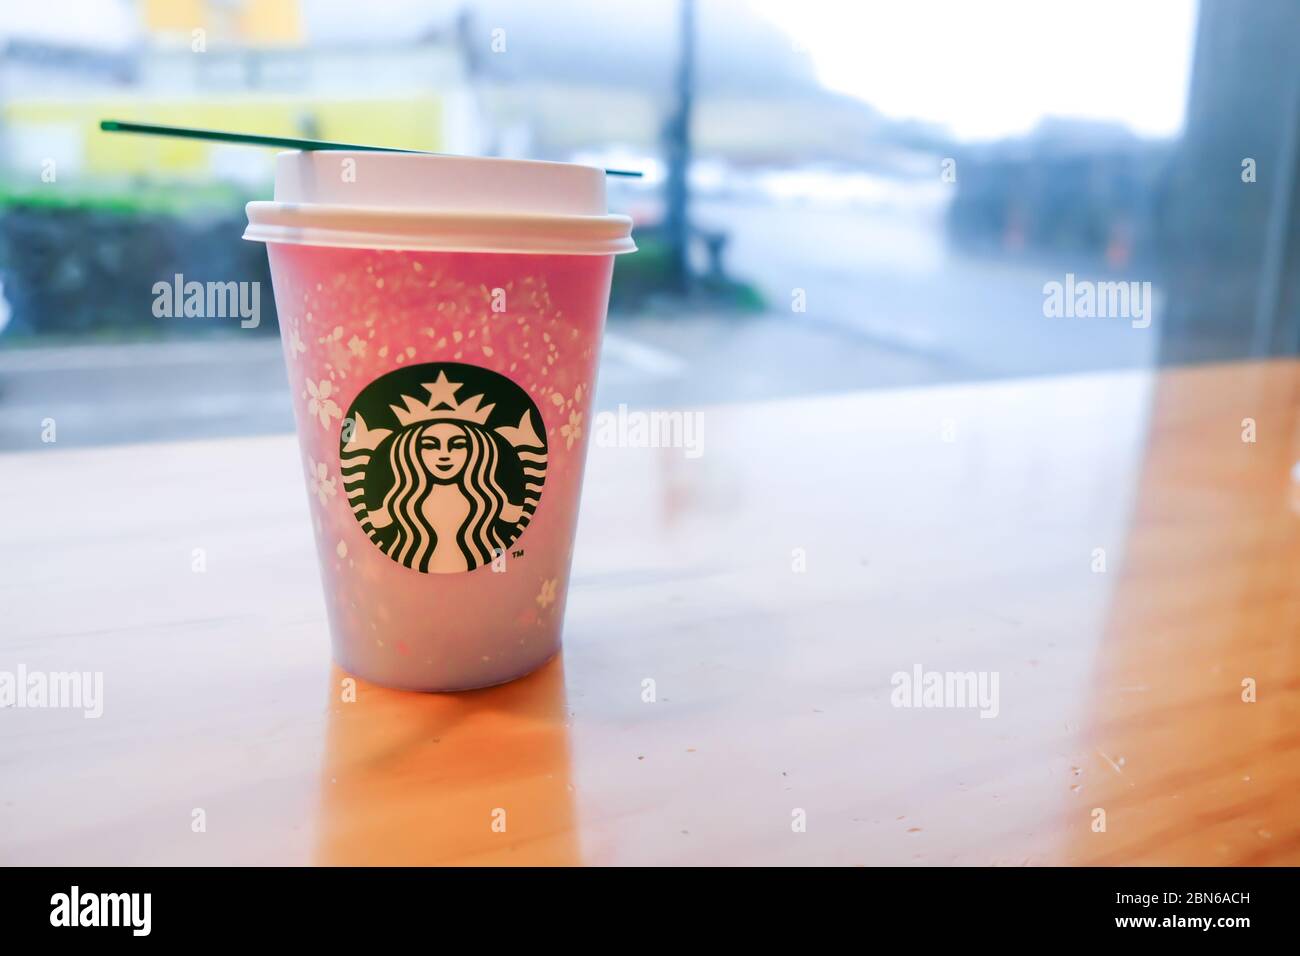 JEJU ISLAND, SOUTH KOREA - APRIL 6, 2017: Special edition Starbuck cups with cherry blossoms pattern for cherry blossom latte beverages Stock Photo